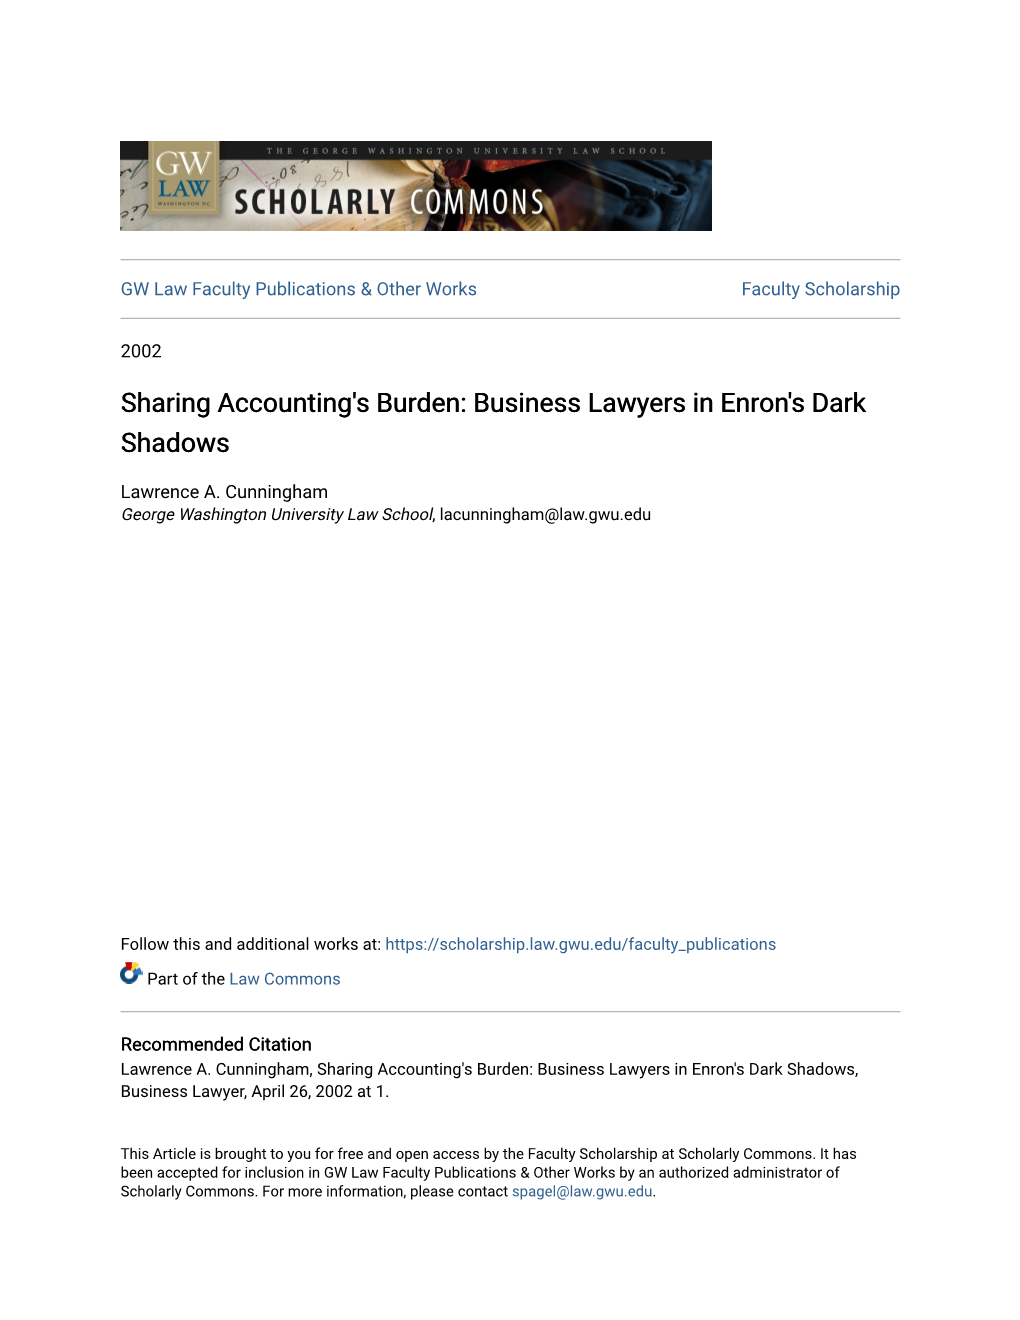 Sharing Accounting's Burden: Business Lawyers in Enron's Dark Shadows